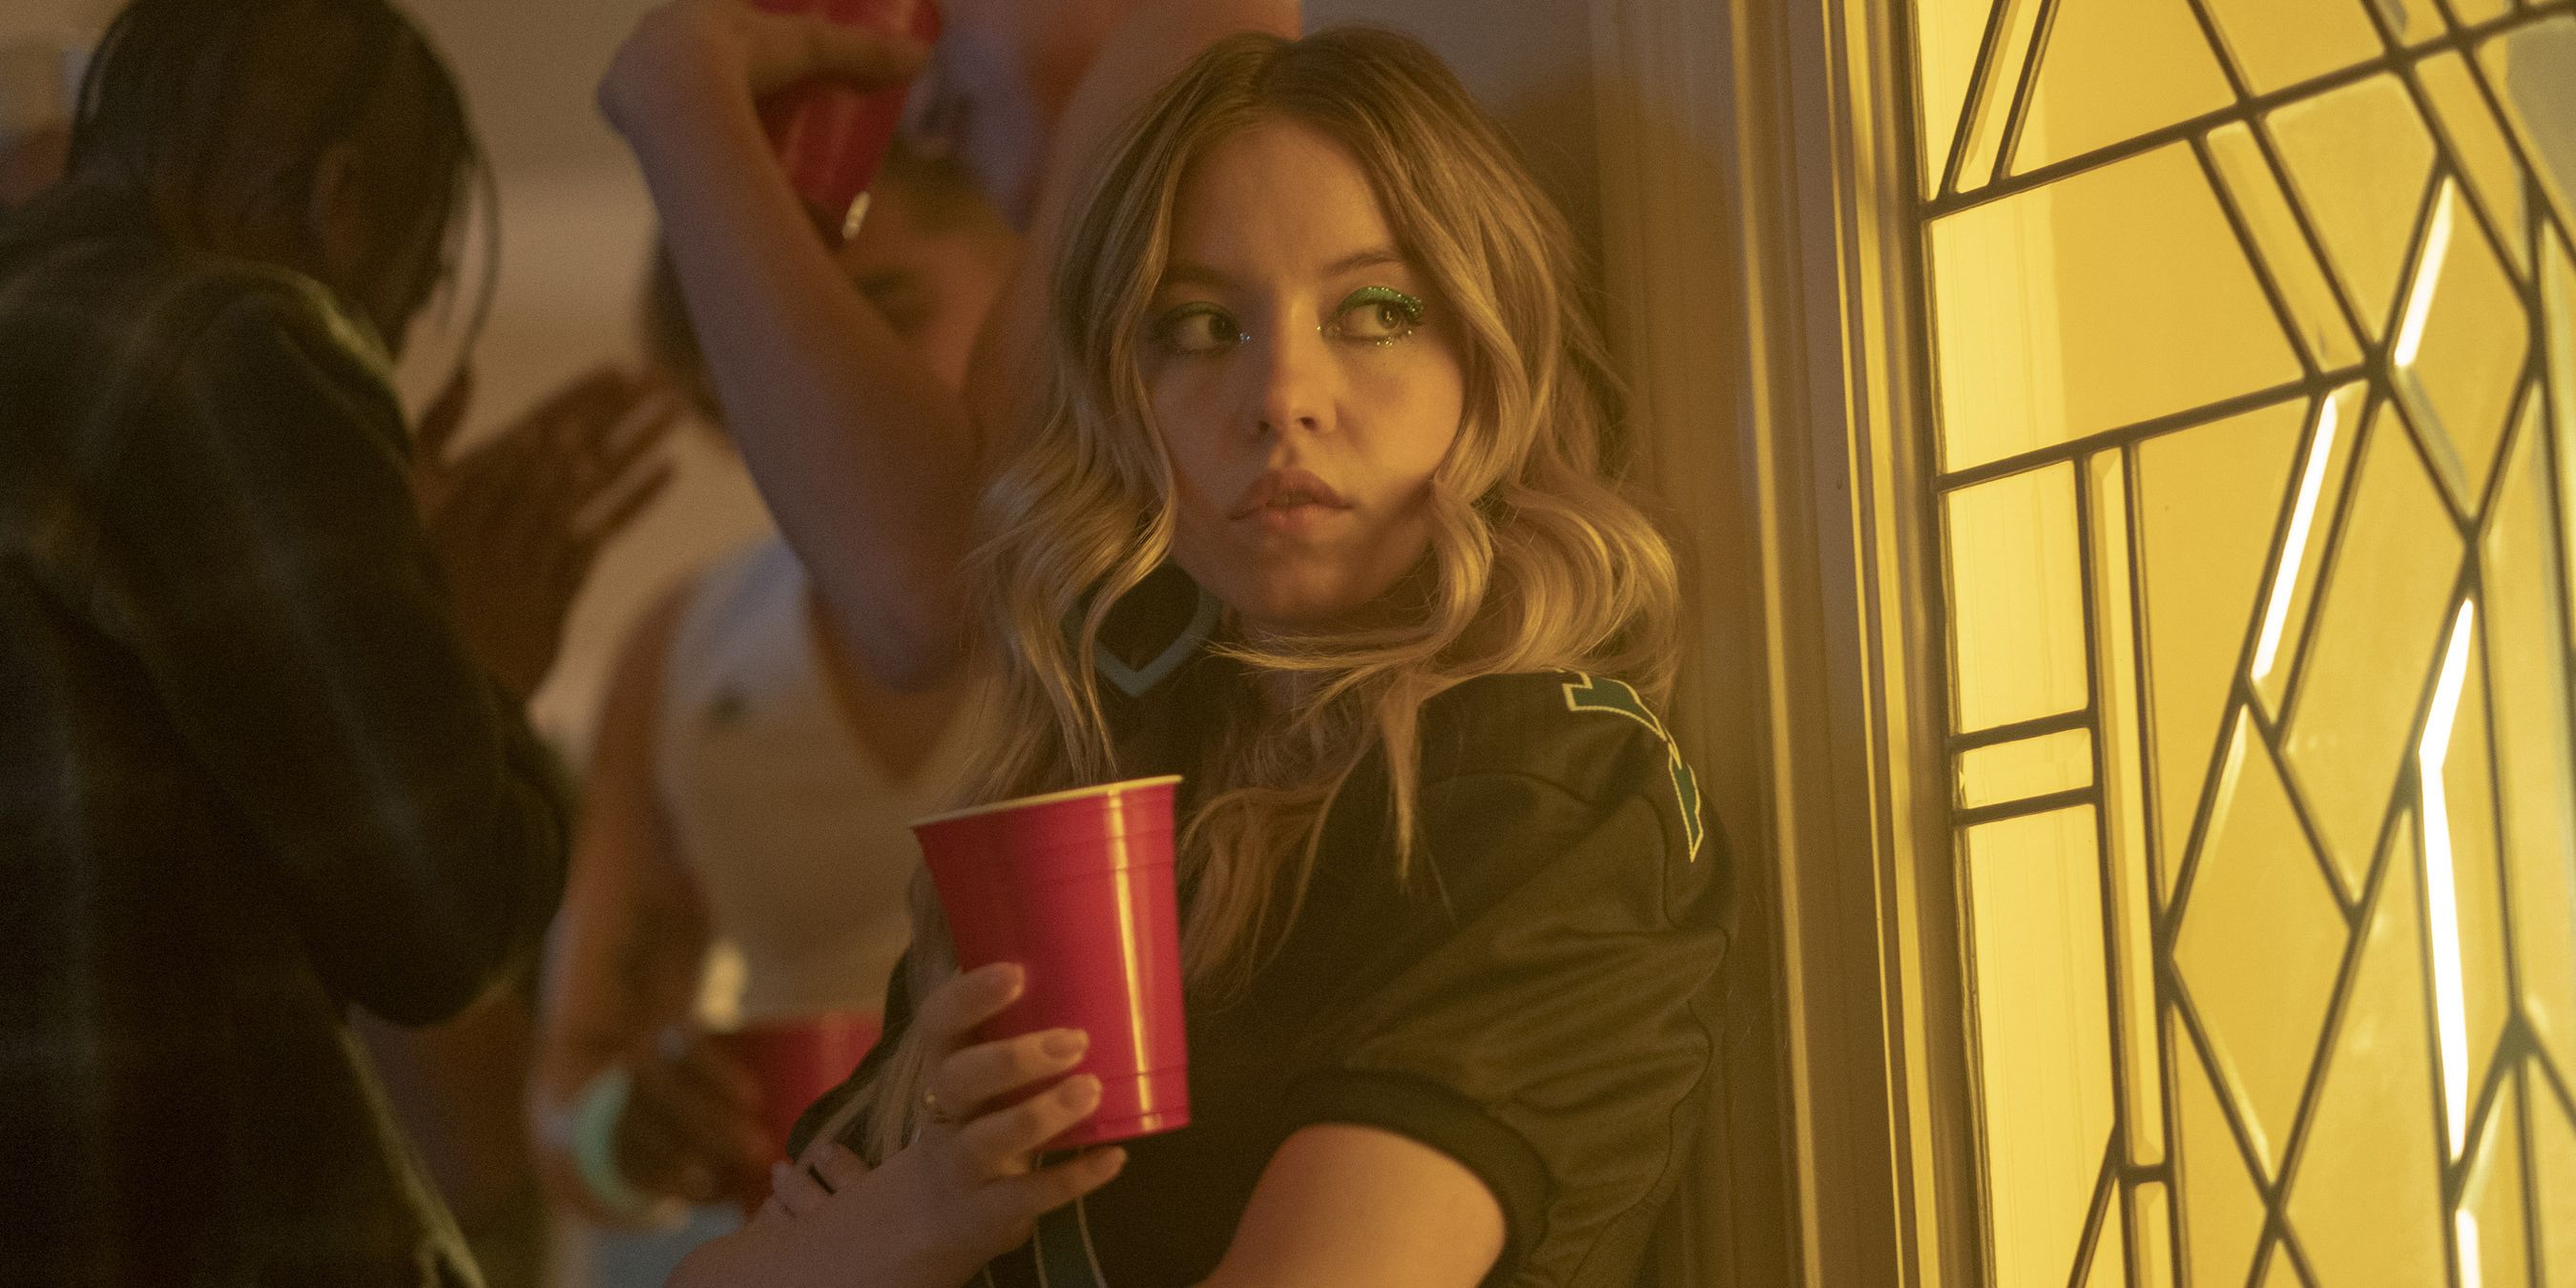 Sydney Sweeney Nailed Tarantinos Ouatih With Chilling “extra Credit”